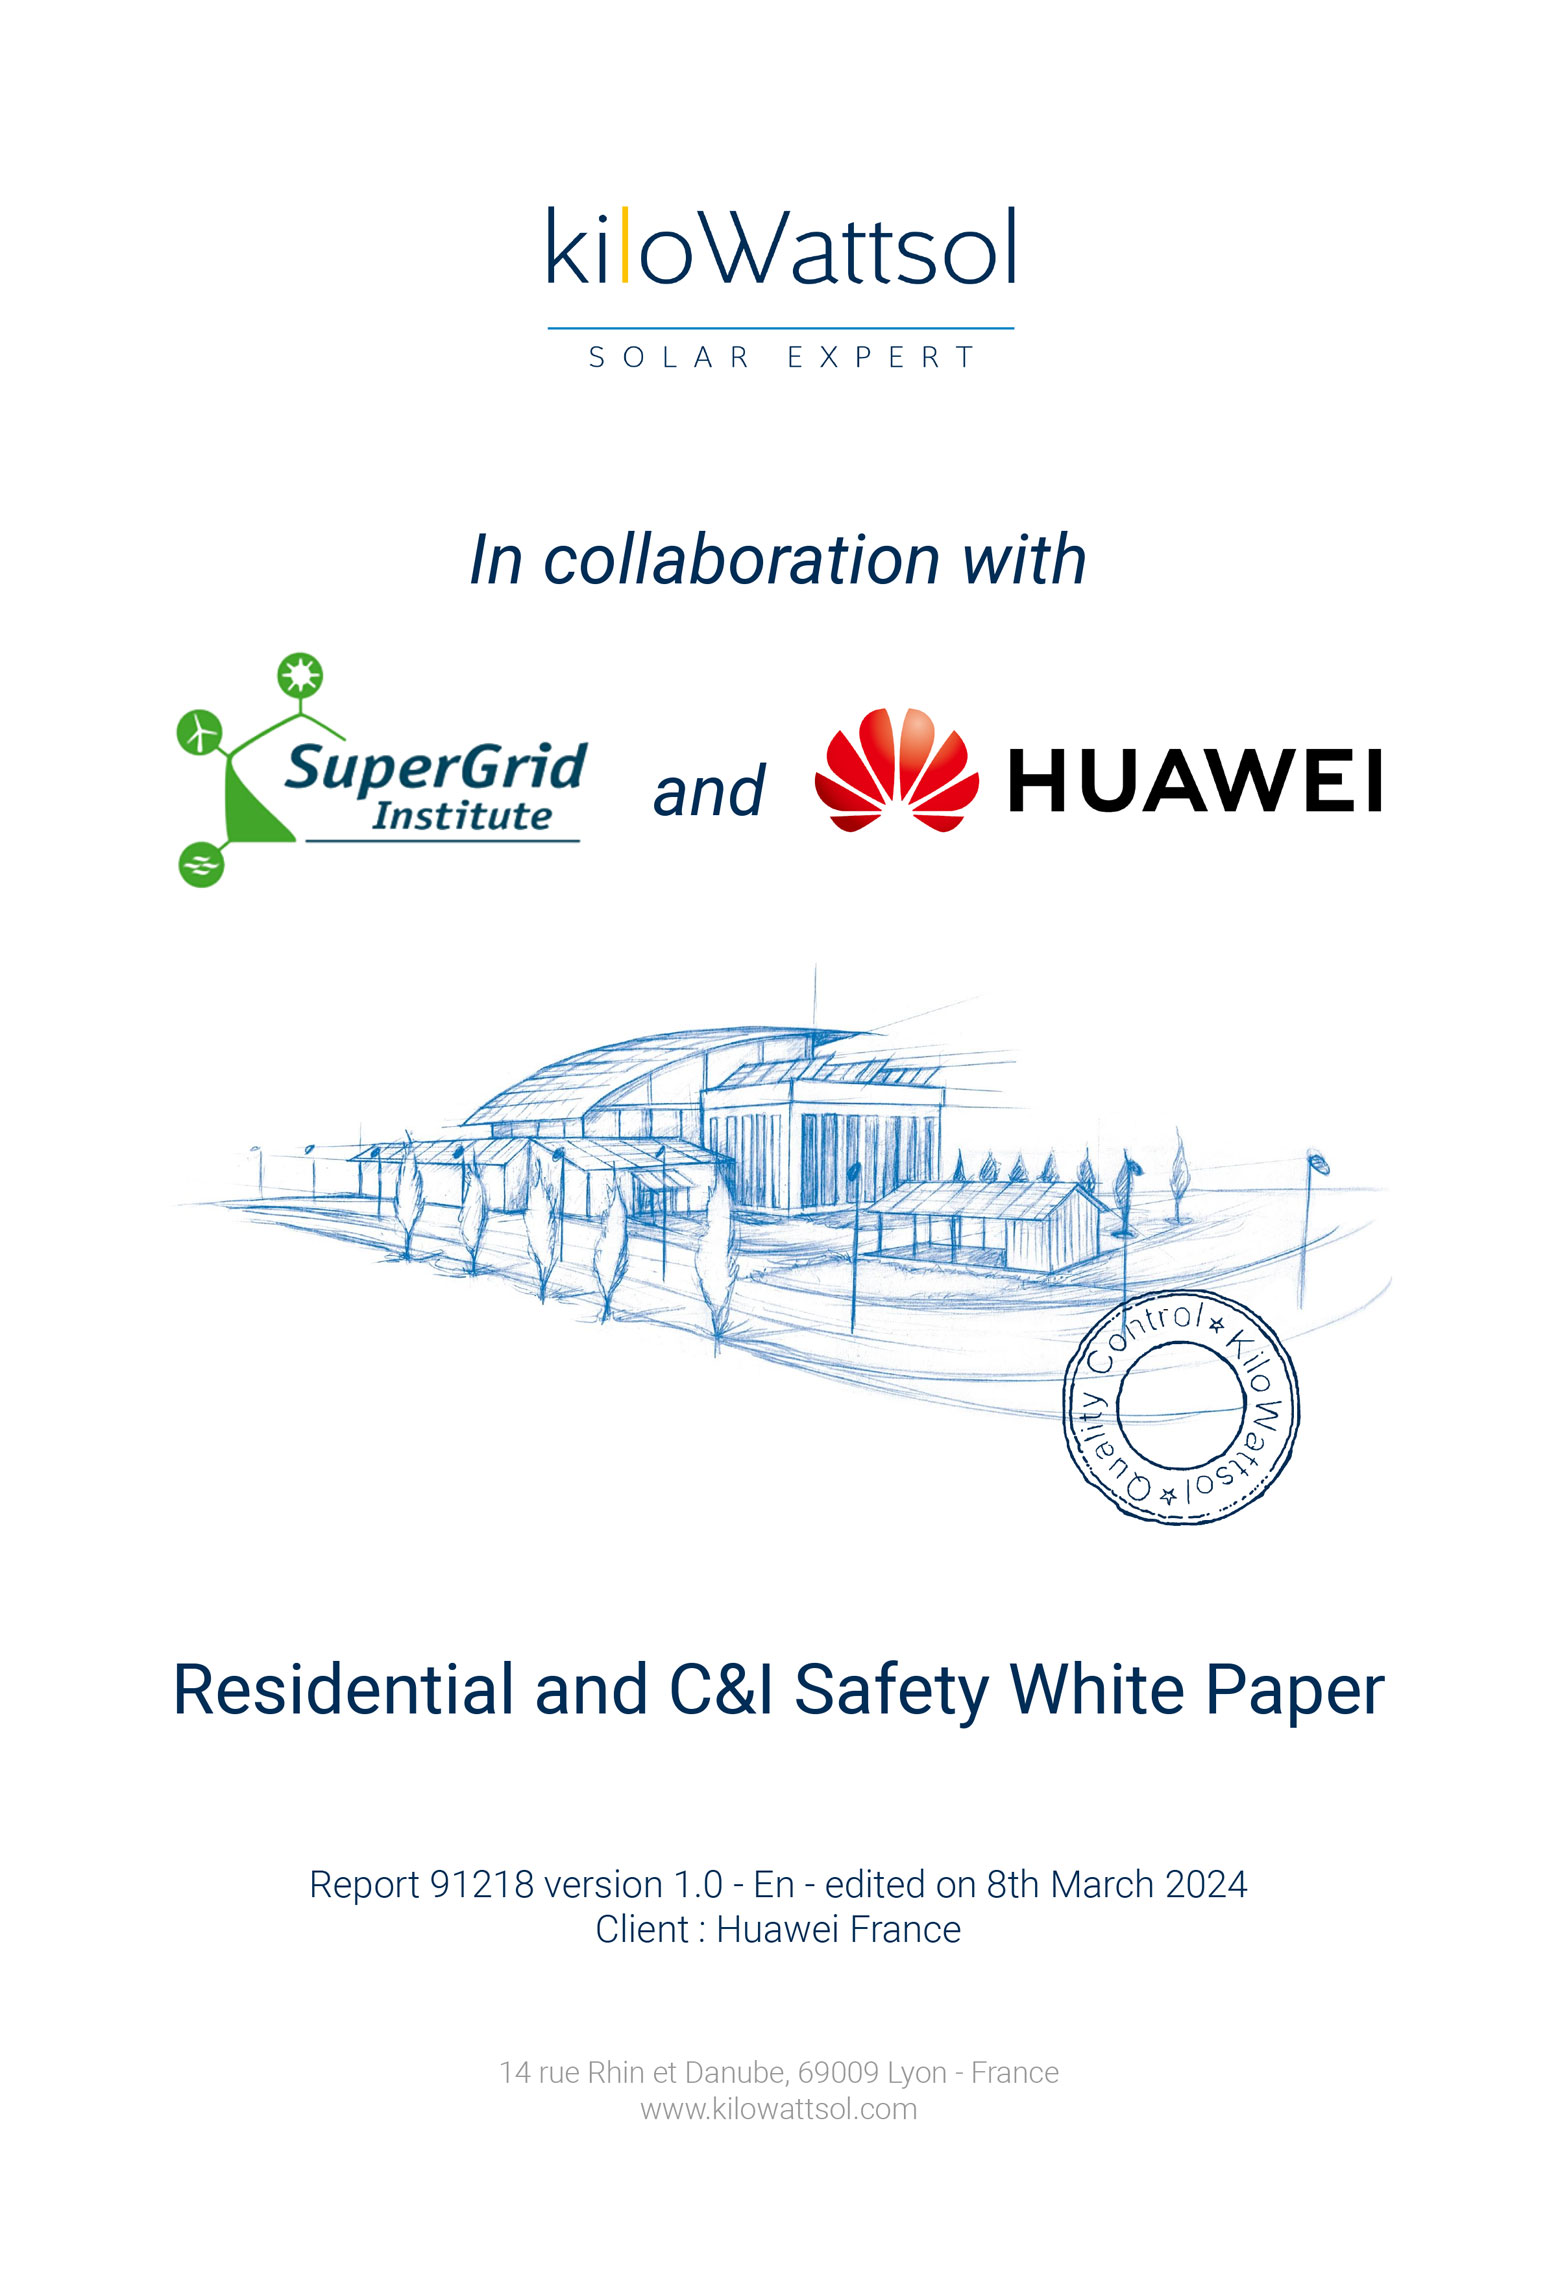 Residential and C&I safety white paper